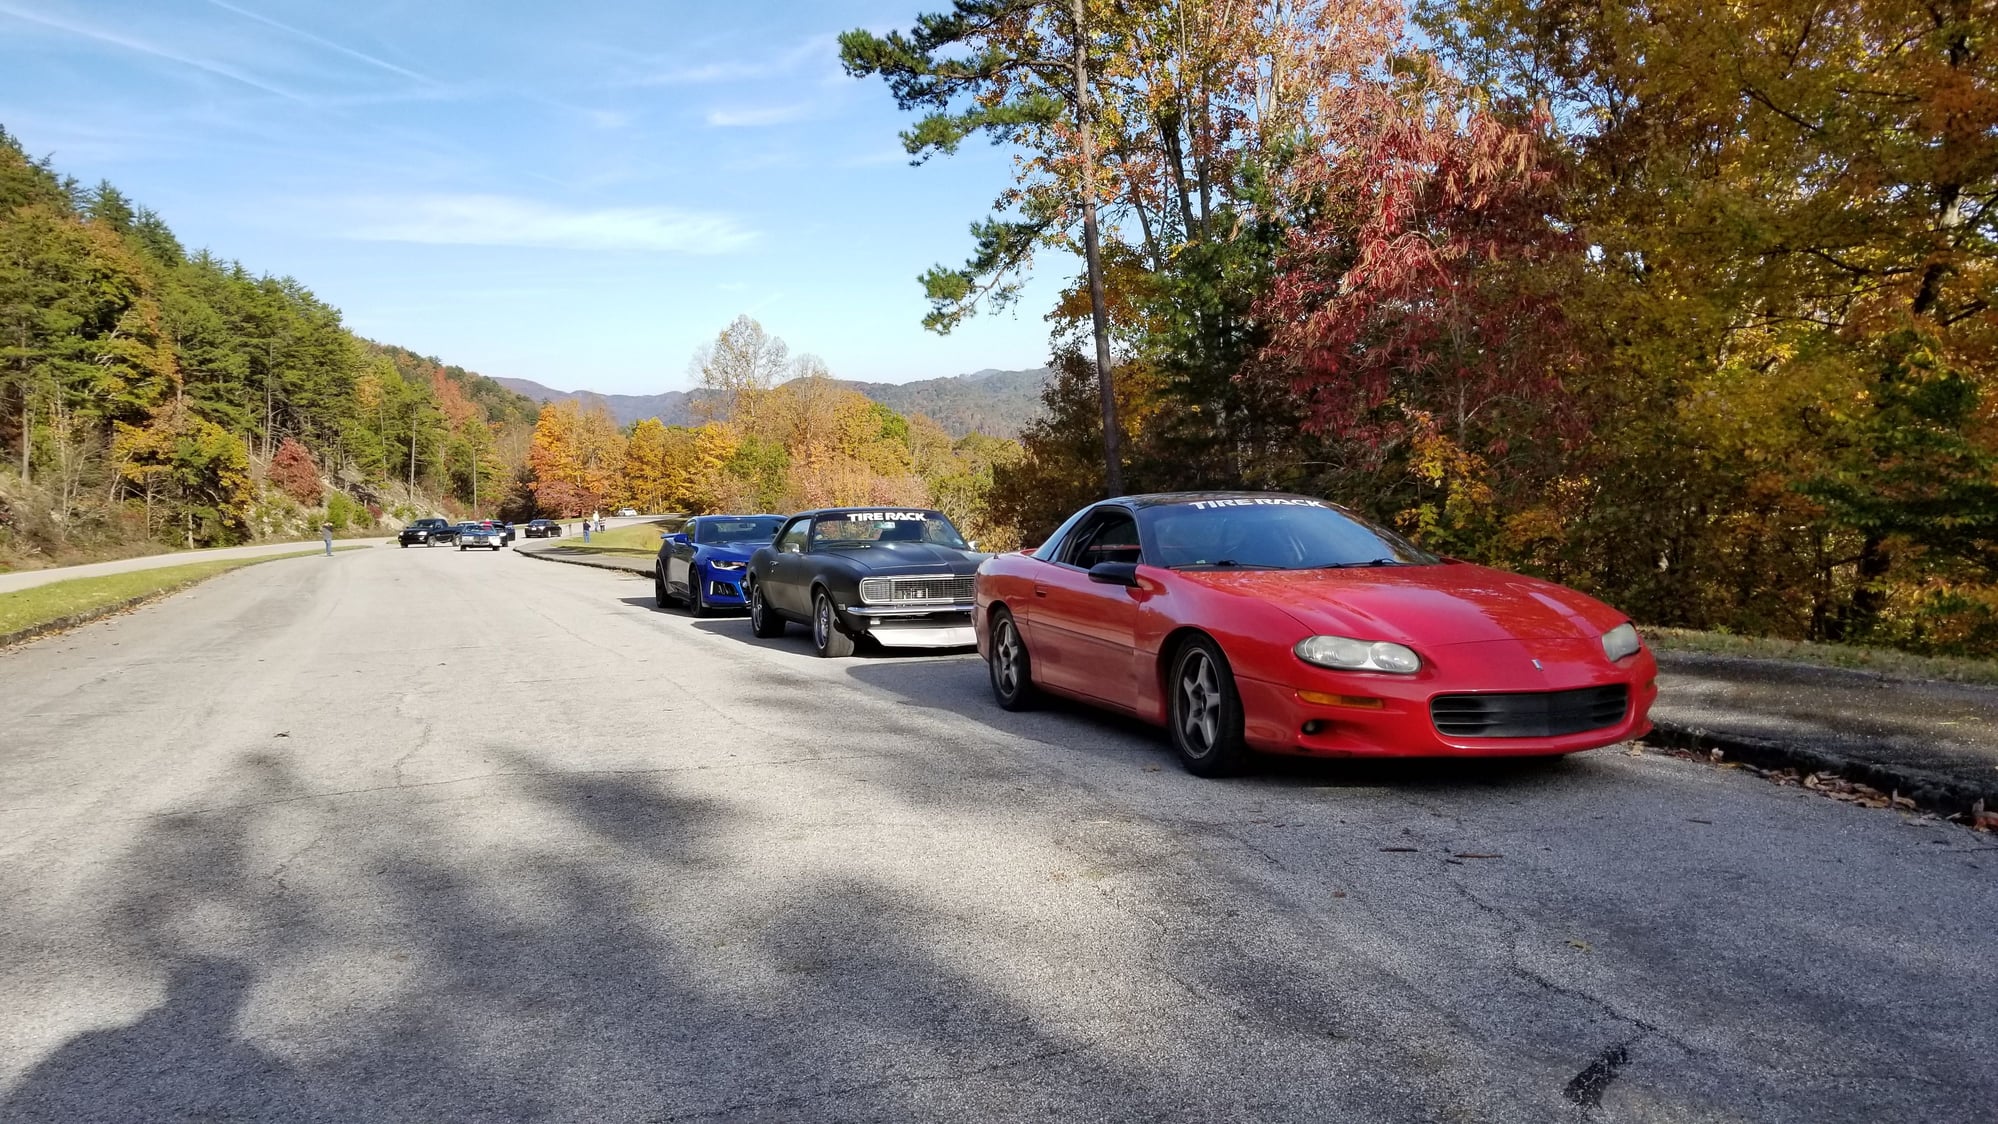 1999 Chevrolet Camaro - 99 z/28 autocross build - Used - VIN Uponrequest - 63,000 Miles - 8 cyl - 2WD - Manual - Coupe - Red - Nashville, TN 37207, United States